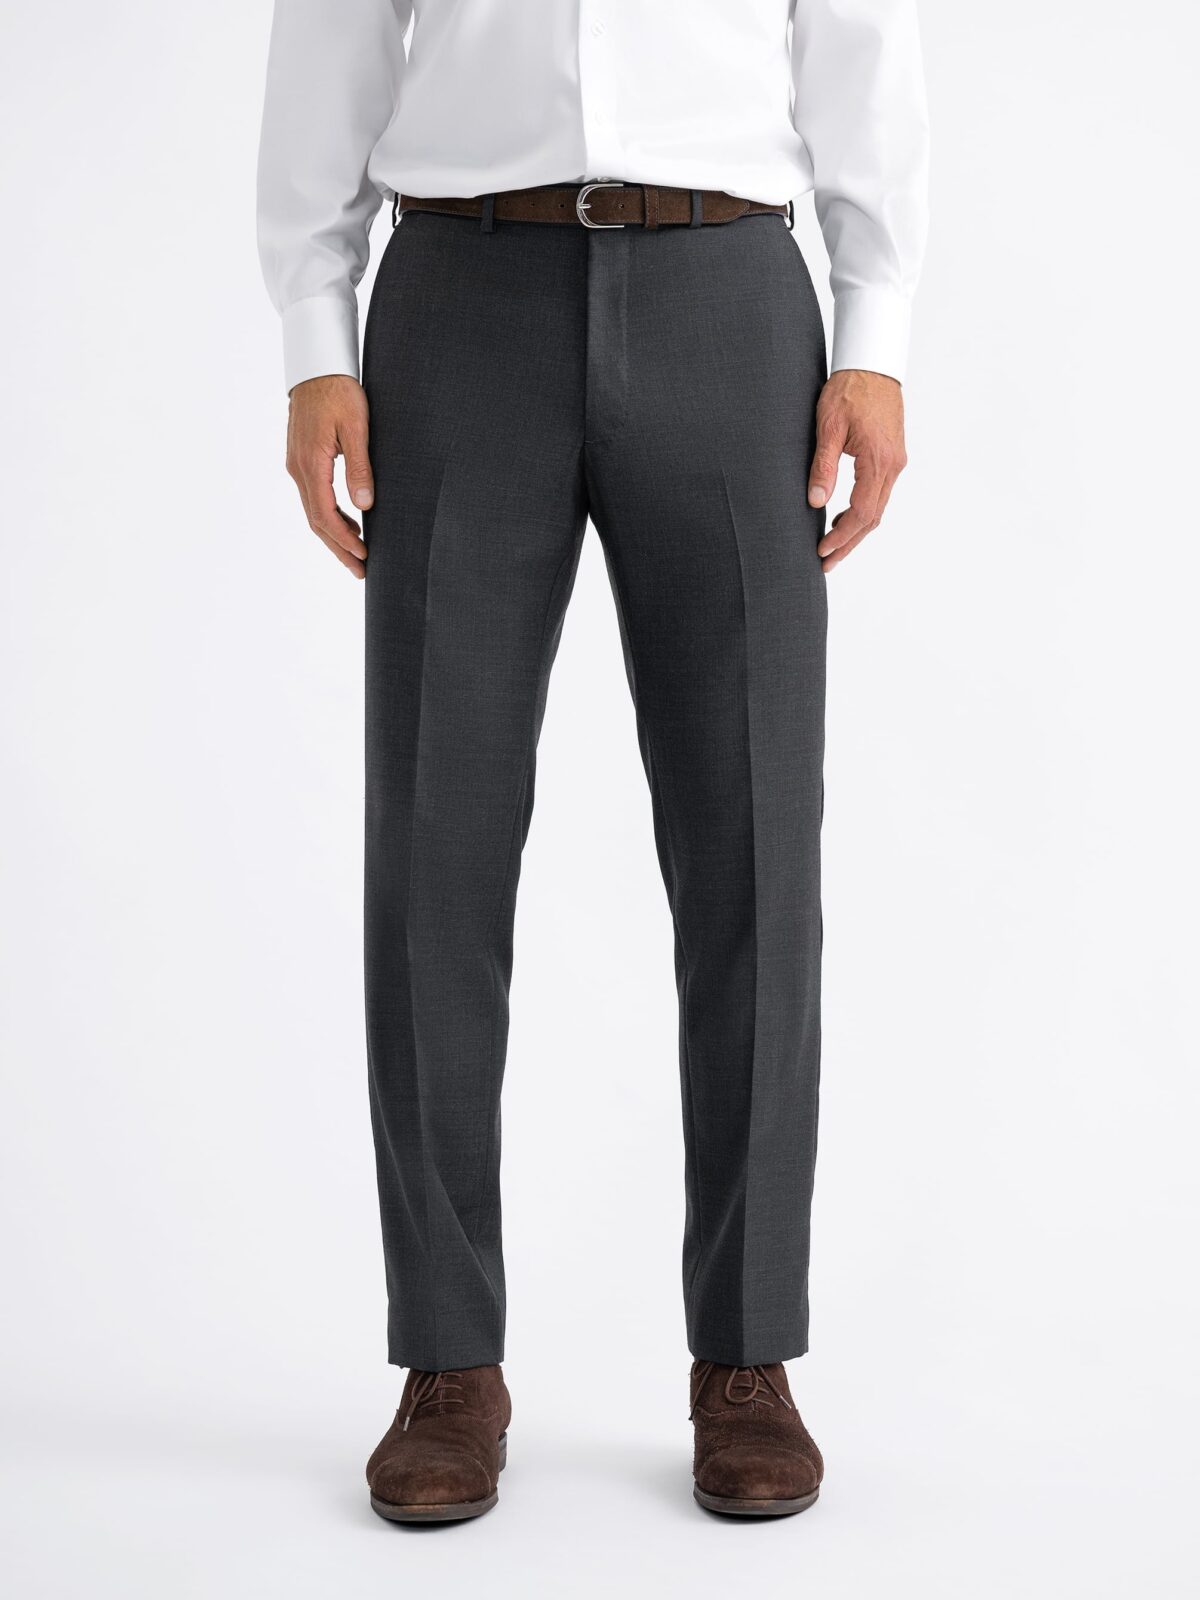 Buy Arrow Tailored Regular Fit Heathered Trousers - NNNOW.com